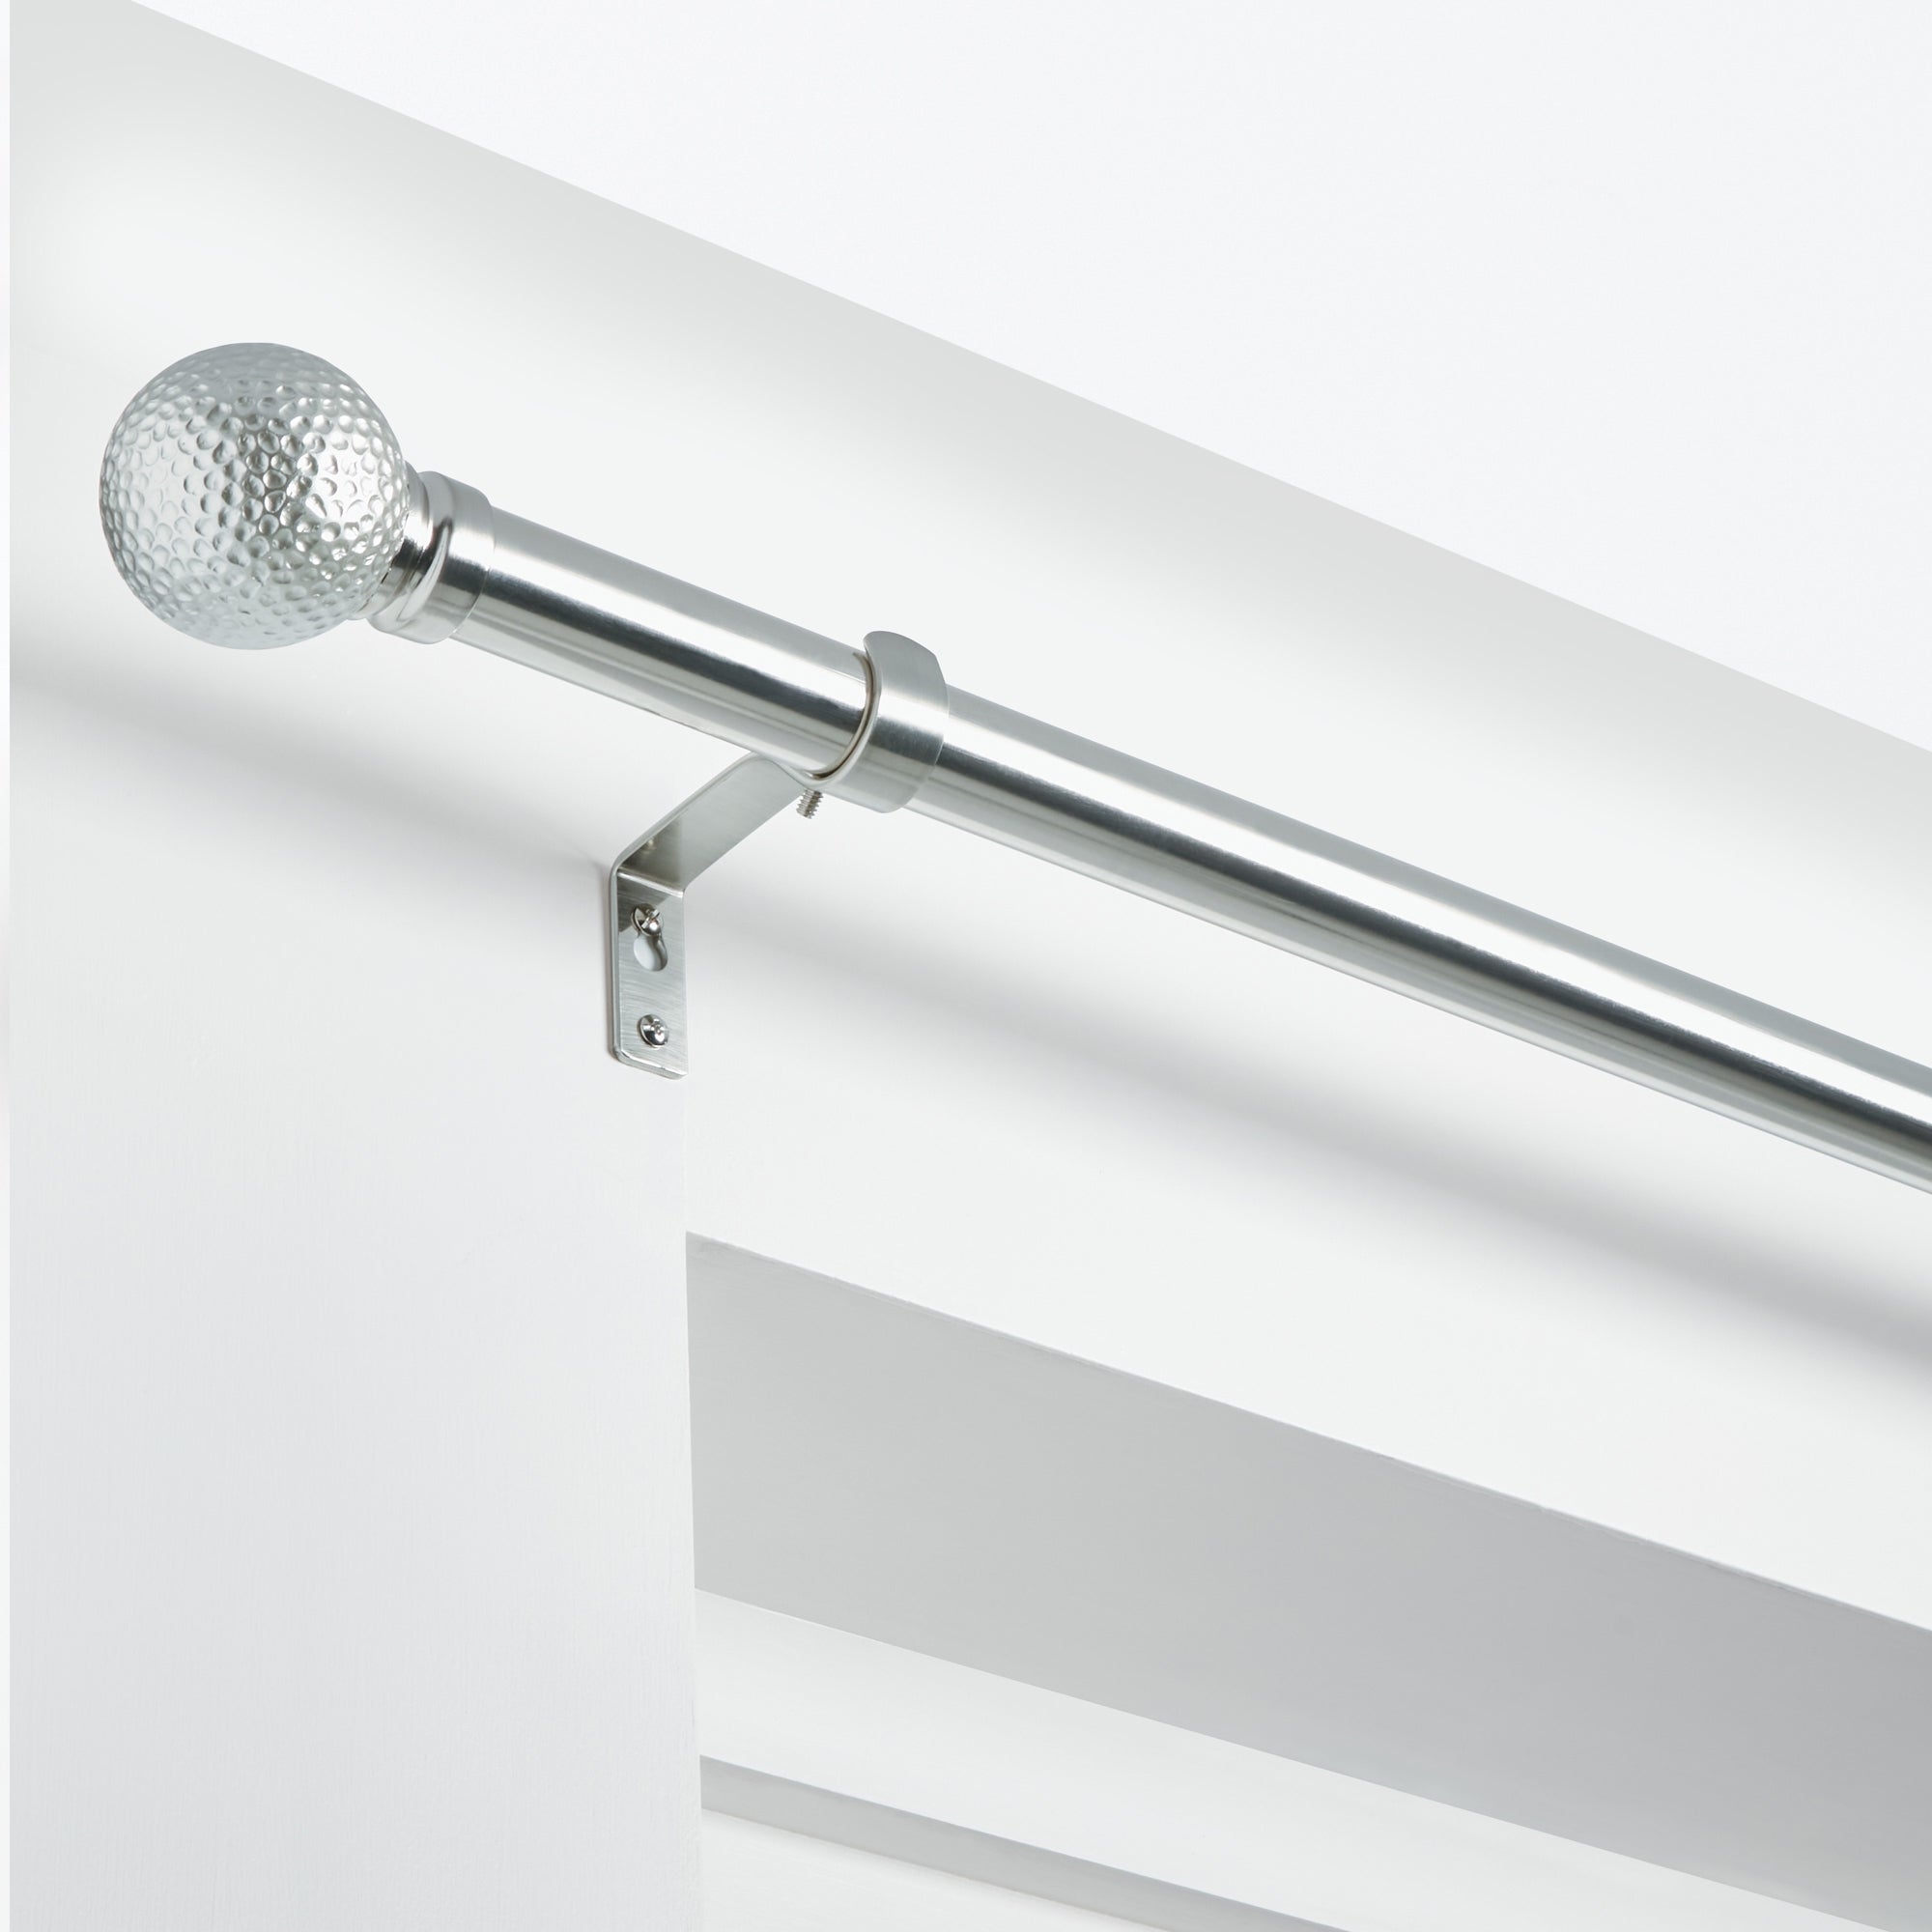 Hammered Effect Extendable Metal Eyelet Curtain Pole